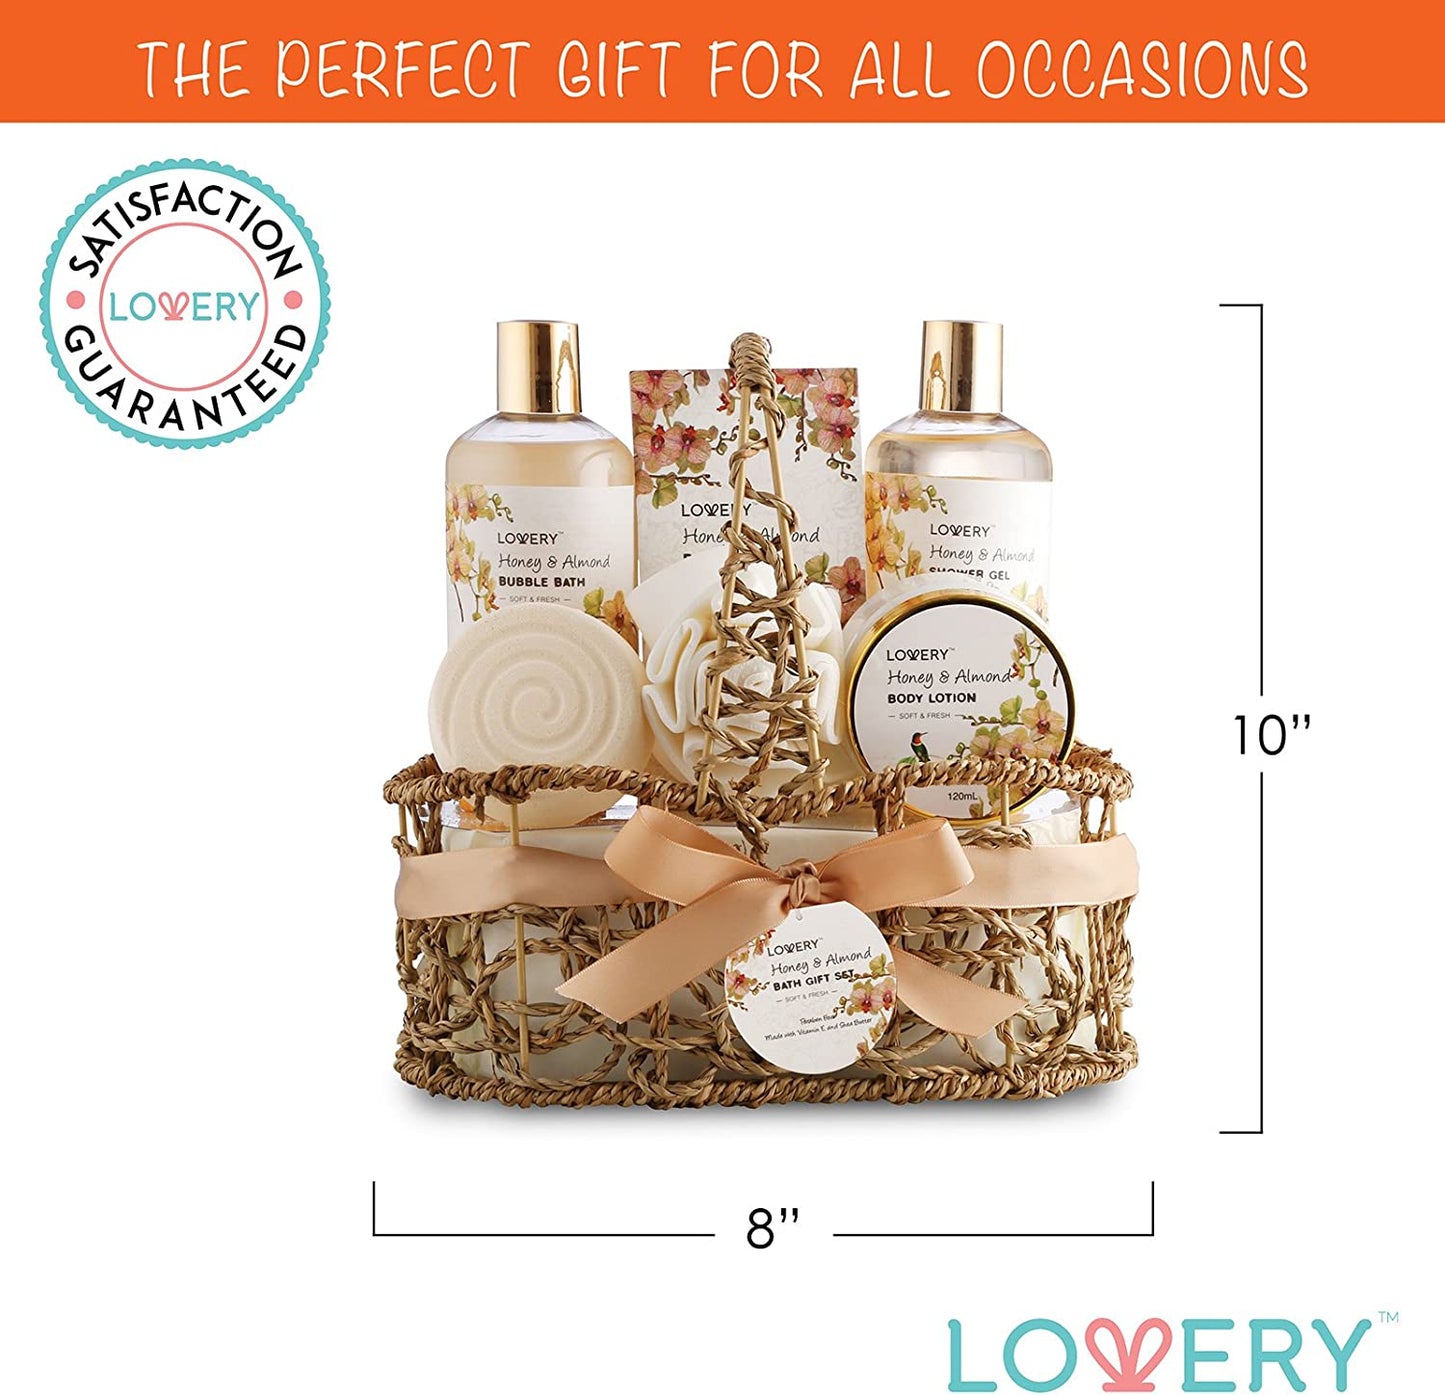 lovery handmade body care, handmade body care, Honey & Almond Body Care Set, Honey & Almond bath product close-up, Luxurious Honey & Almond spa essentials, eco-friendly bath set display, Shea & Vitamin E, spa items, Natural ingredients, all skin types, bath products, Paraben-free, Honey & Almond collection